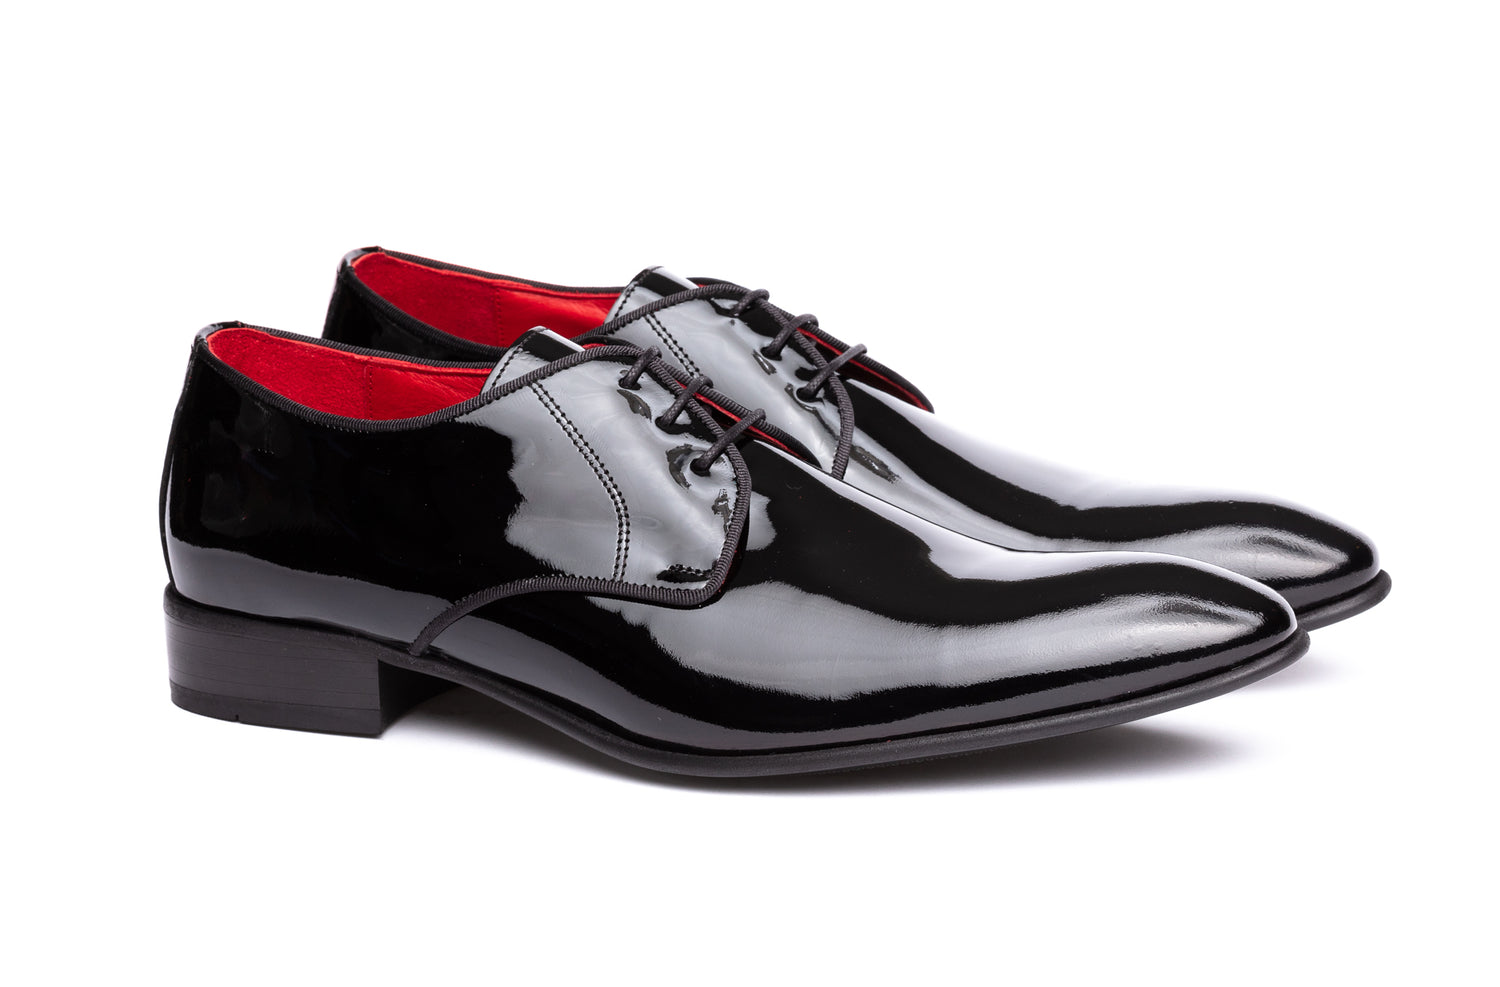 The Sinatra Shoes - Shoes by Urbbana